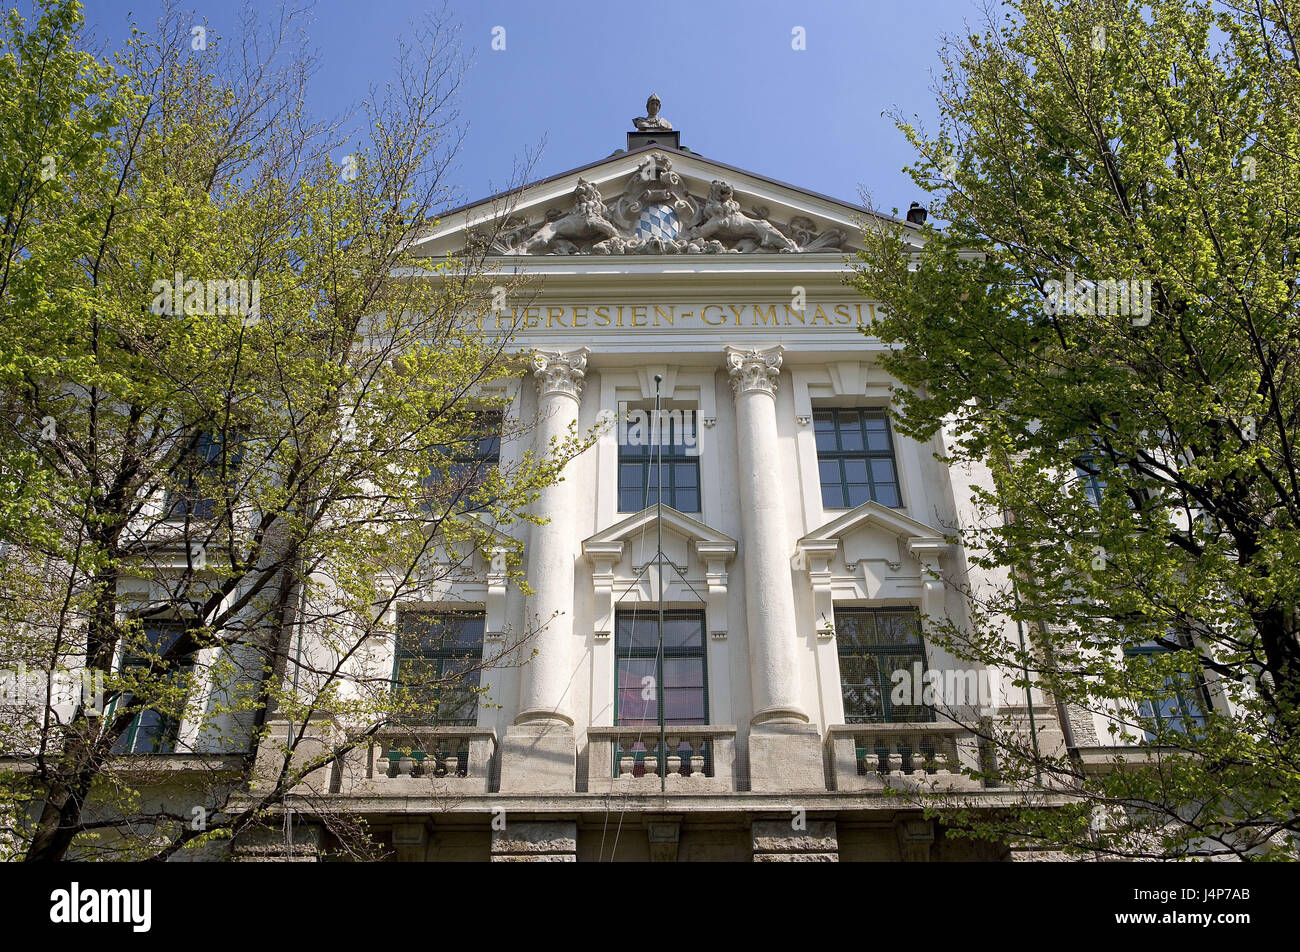 Germany, Bavaria, Munich, Theresien high school, outside, town, Ludwig's suburb, imperial Ludwig's square, building, school, Theresiengymnasium, high school, facade, school education, education, architecture, sky, blue, Stock Photo